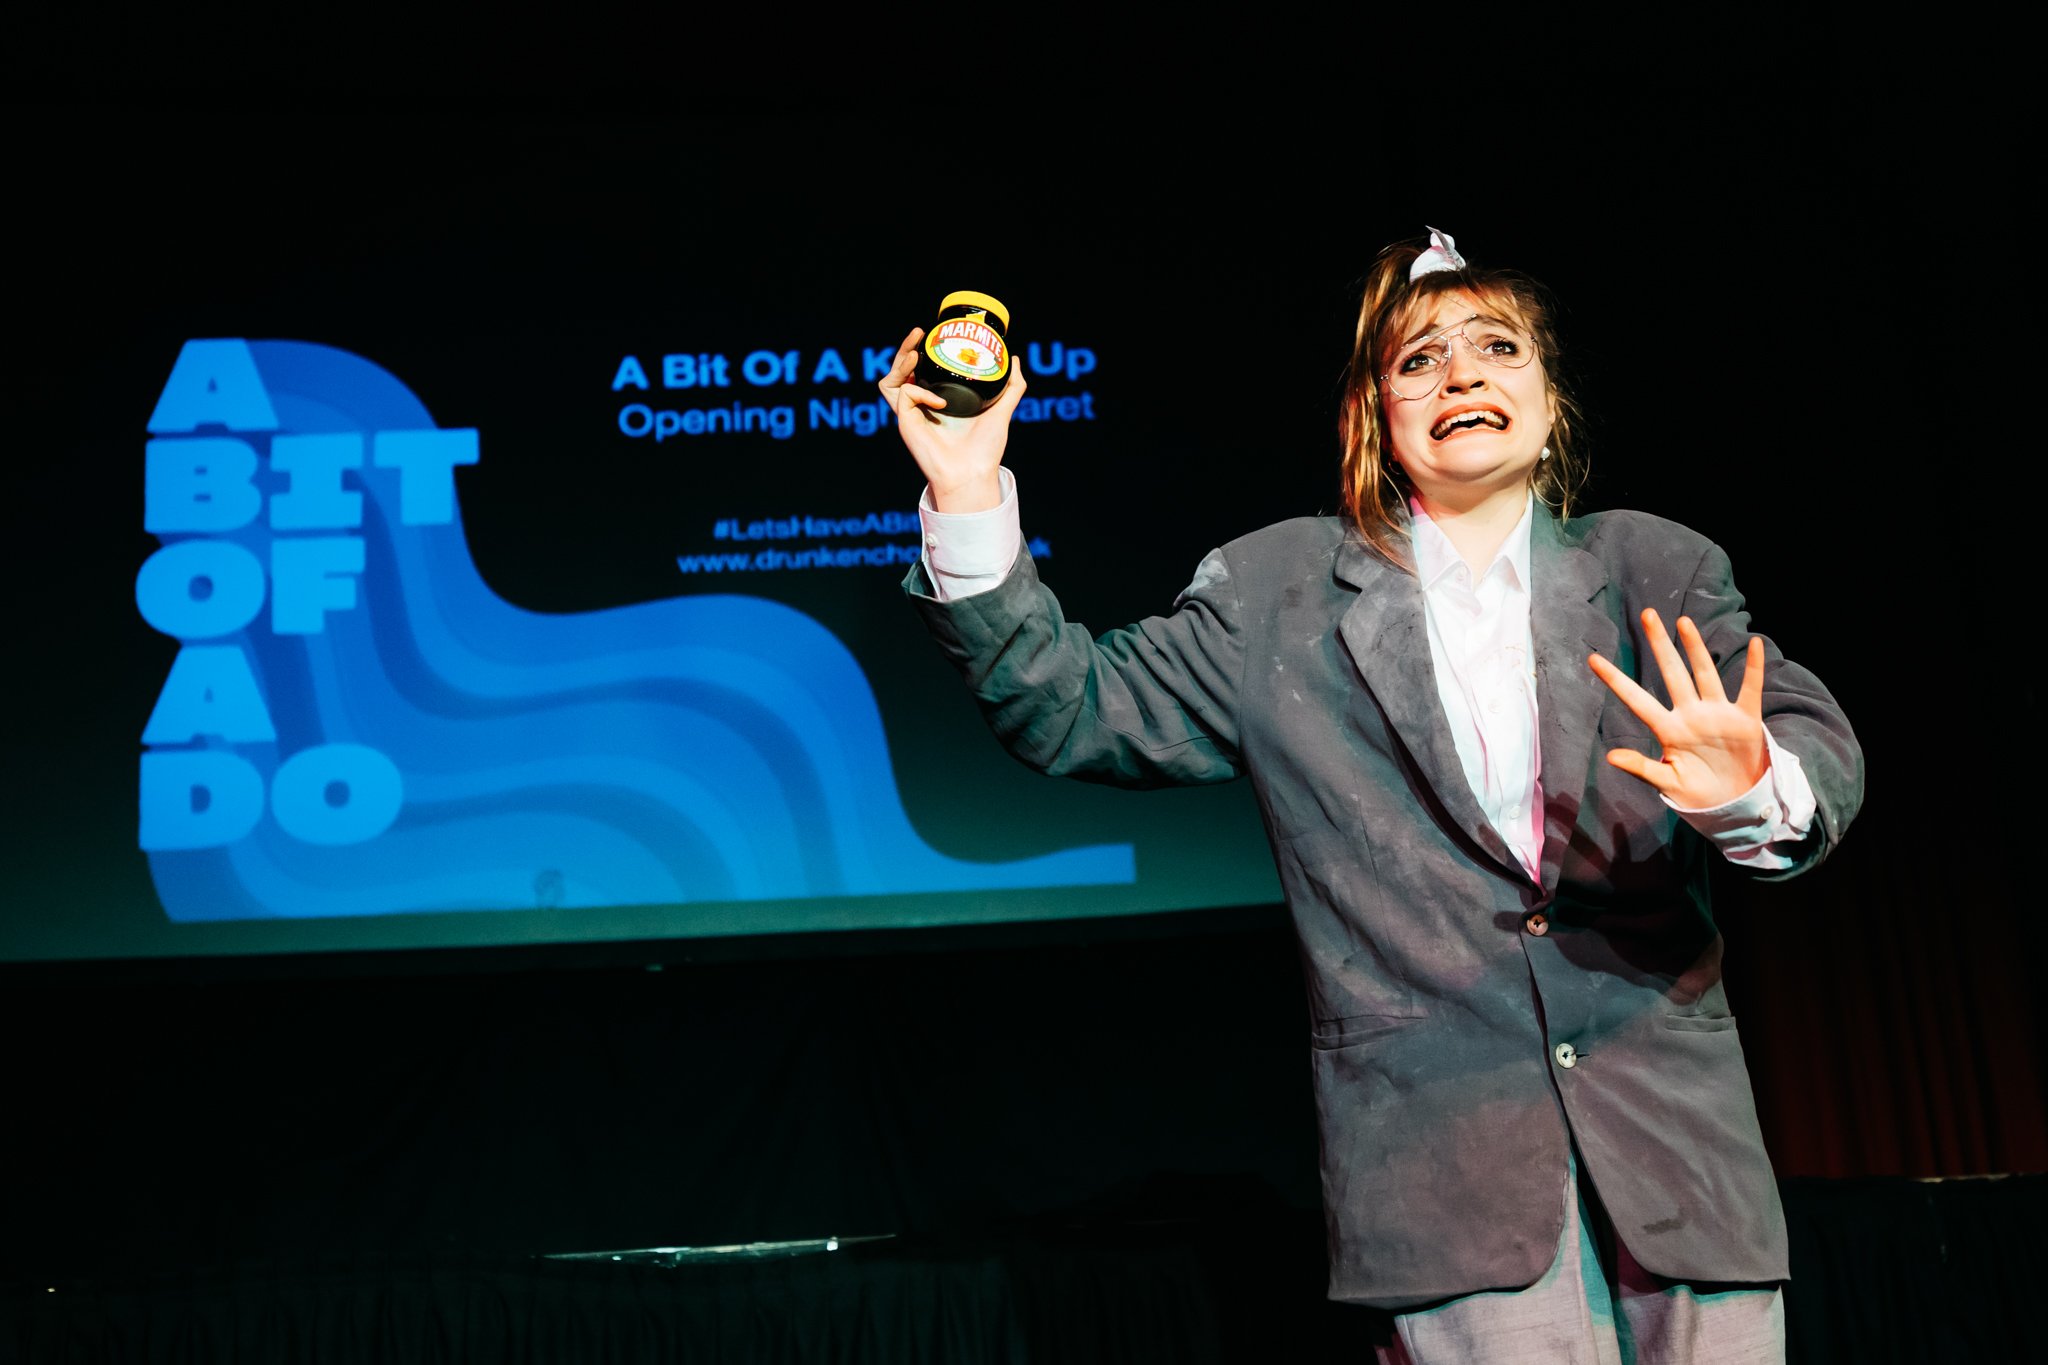  A performer stands on stage with a jar of marmite aloft in one hand and a grimace on her face. She wears a grey suit with a white shirt underneath and her long brown hair is in a pony tail. On a screen behind her are the words 'A Bit Of A Do' 